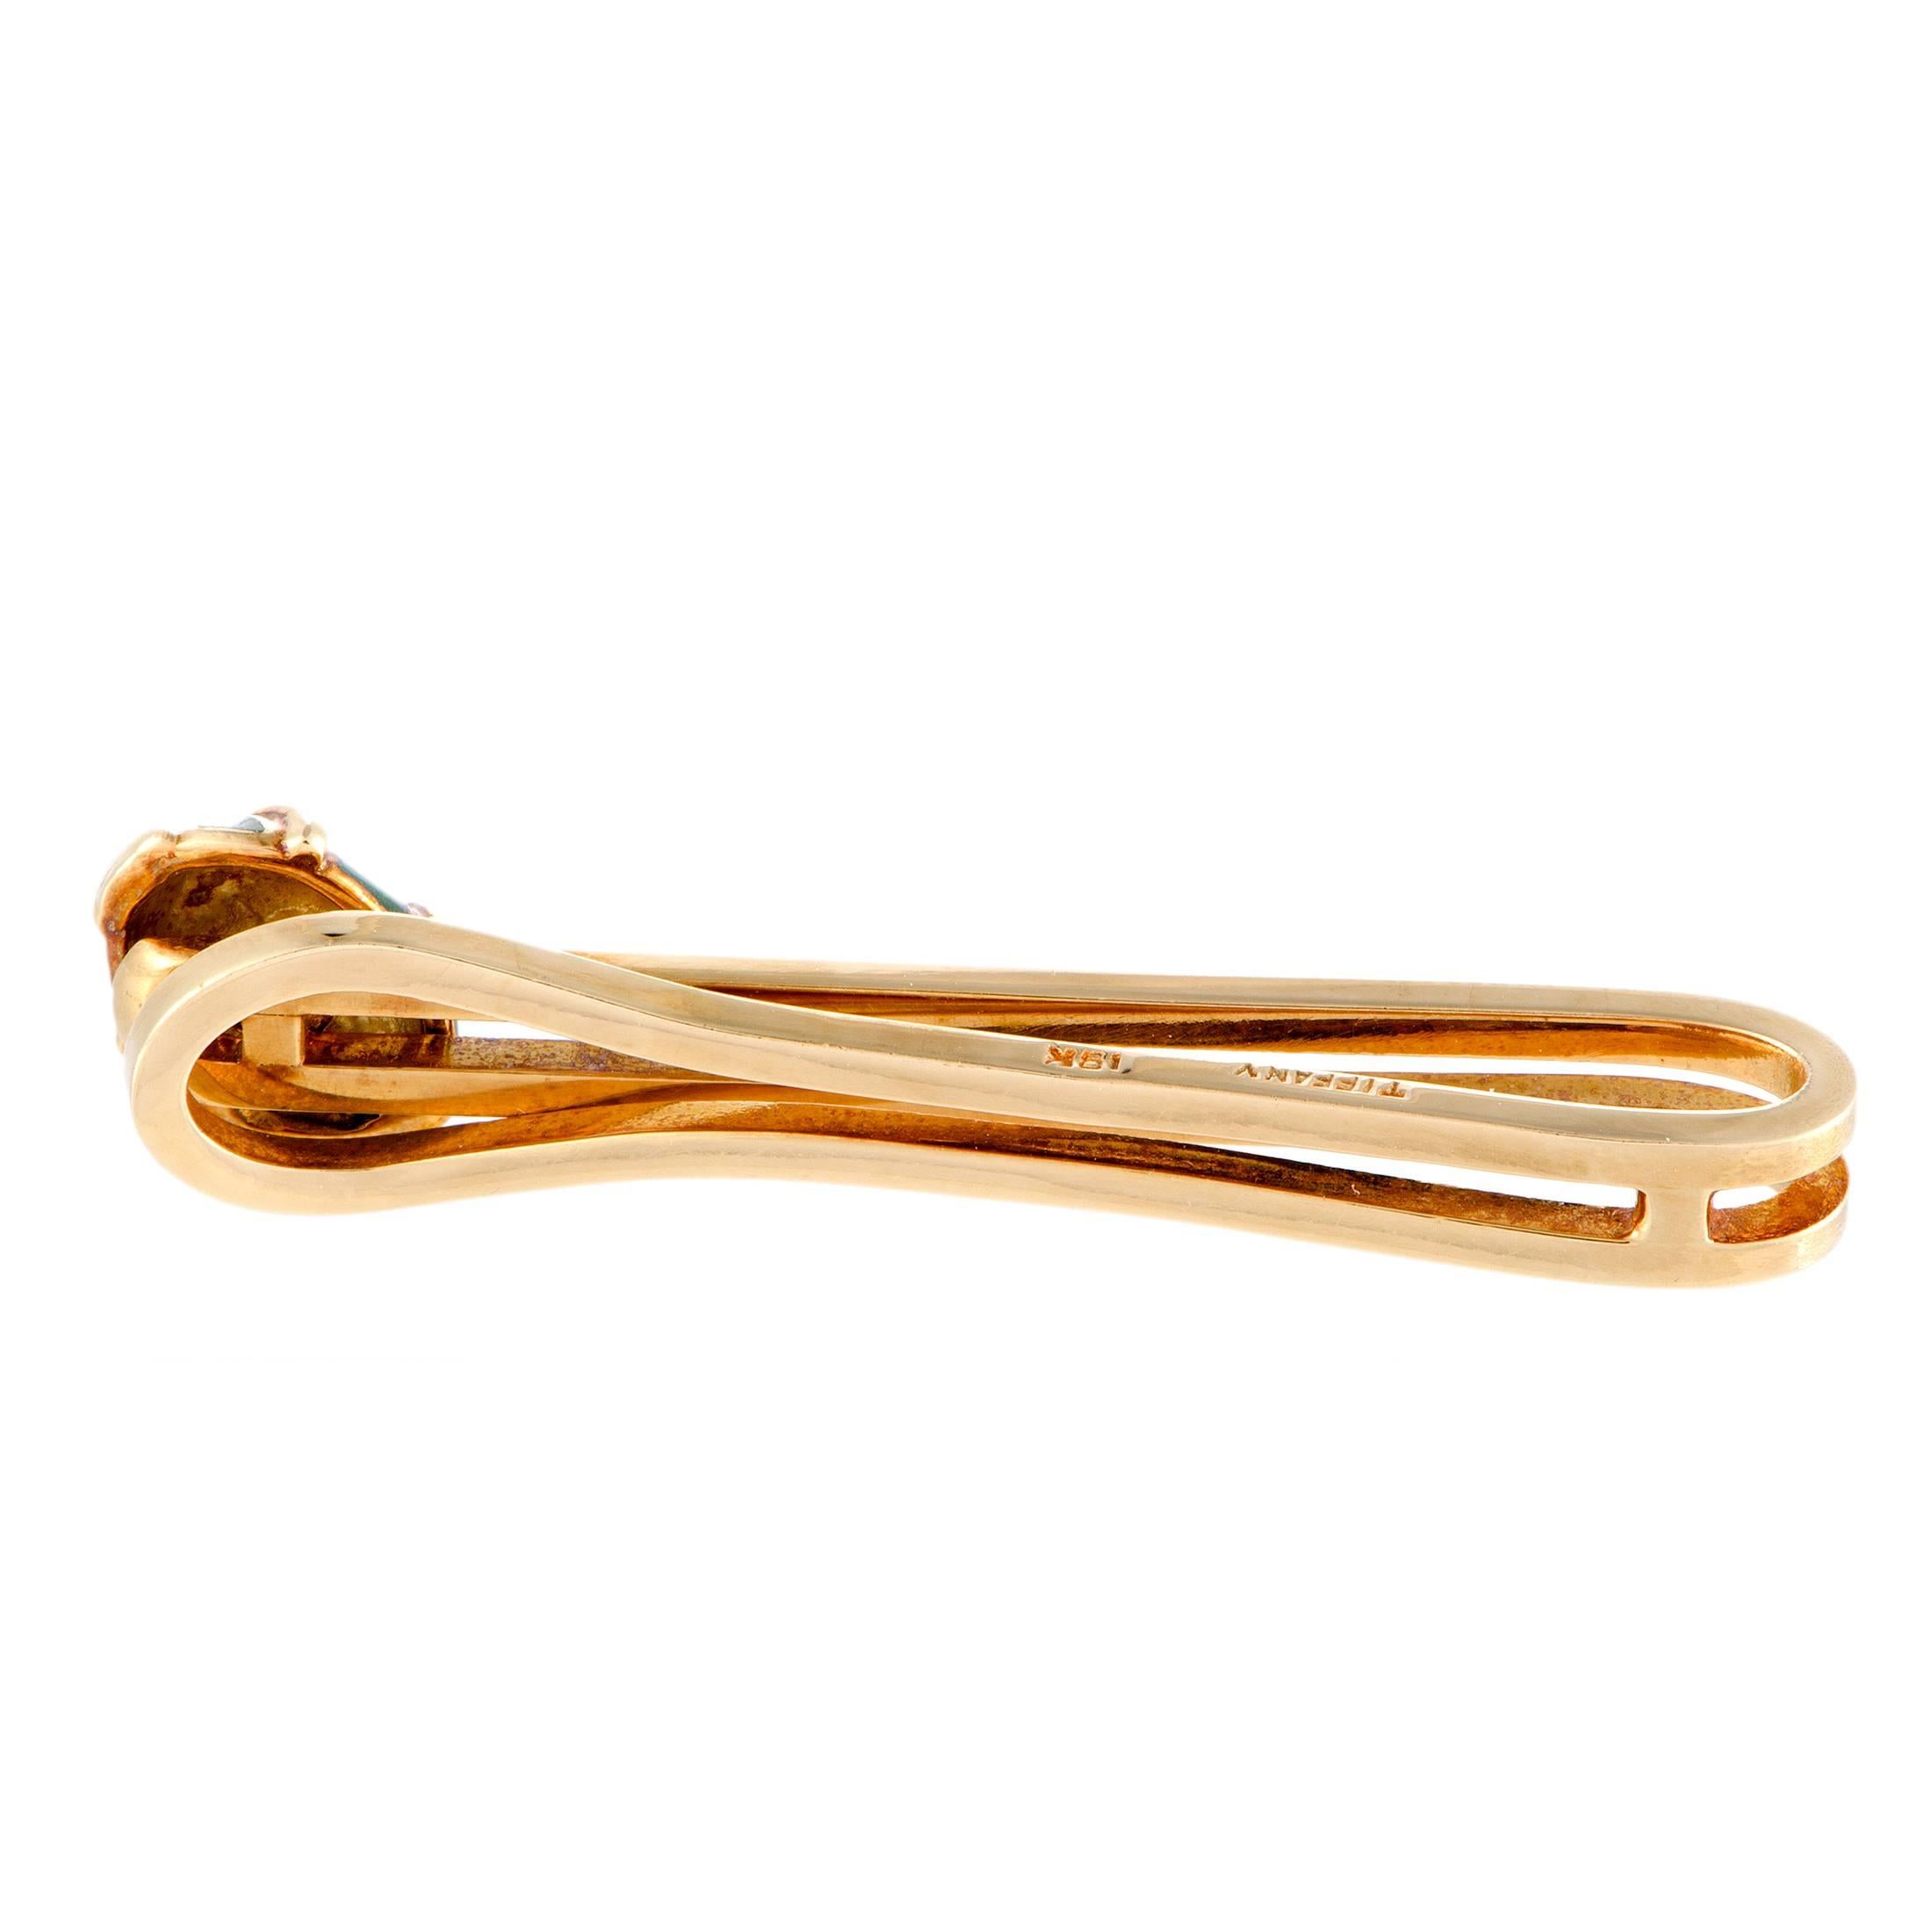 A timelessly elegant and sophisticated design is given a stunning twist in the form of vividly green enamel to add bright color to the luxurious sheen of 18K yellow gold in this remarkable tie bar designed by Jean Schlumberger for Tiffany &